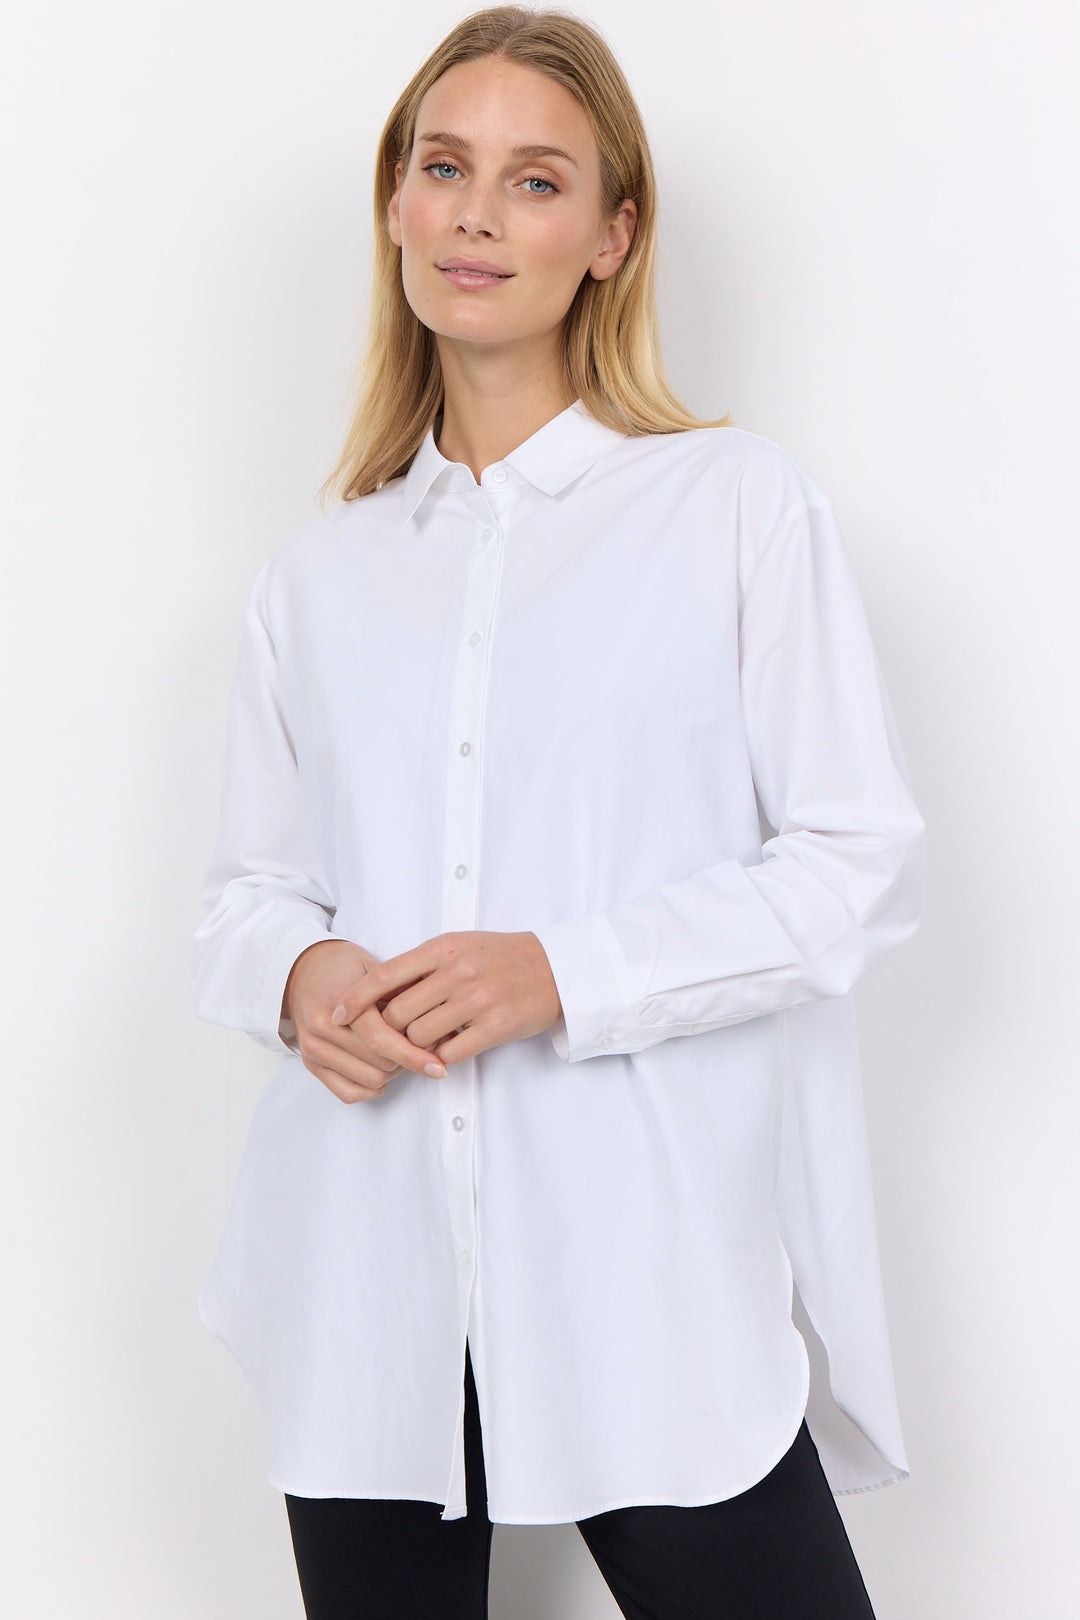 This blouse shirt offers a classic, relaxed fit and is made with eco-friendly cotton for a free-flowing, chic look. 